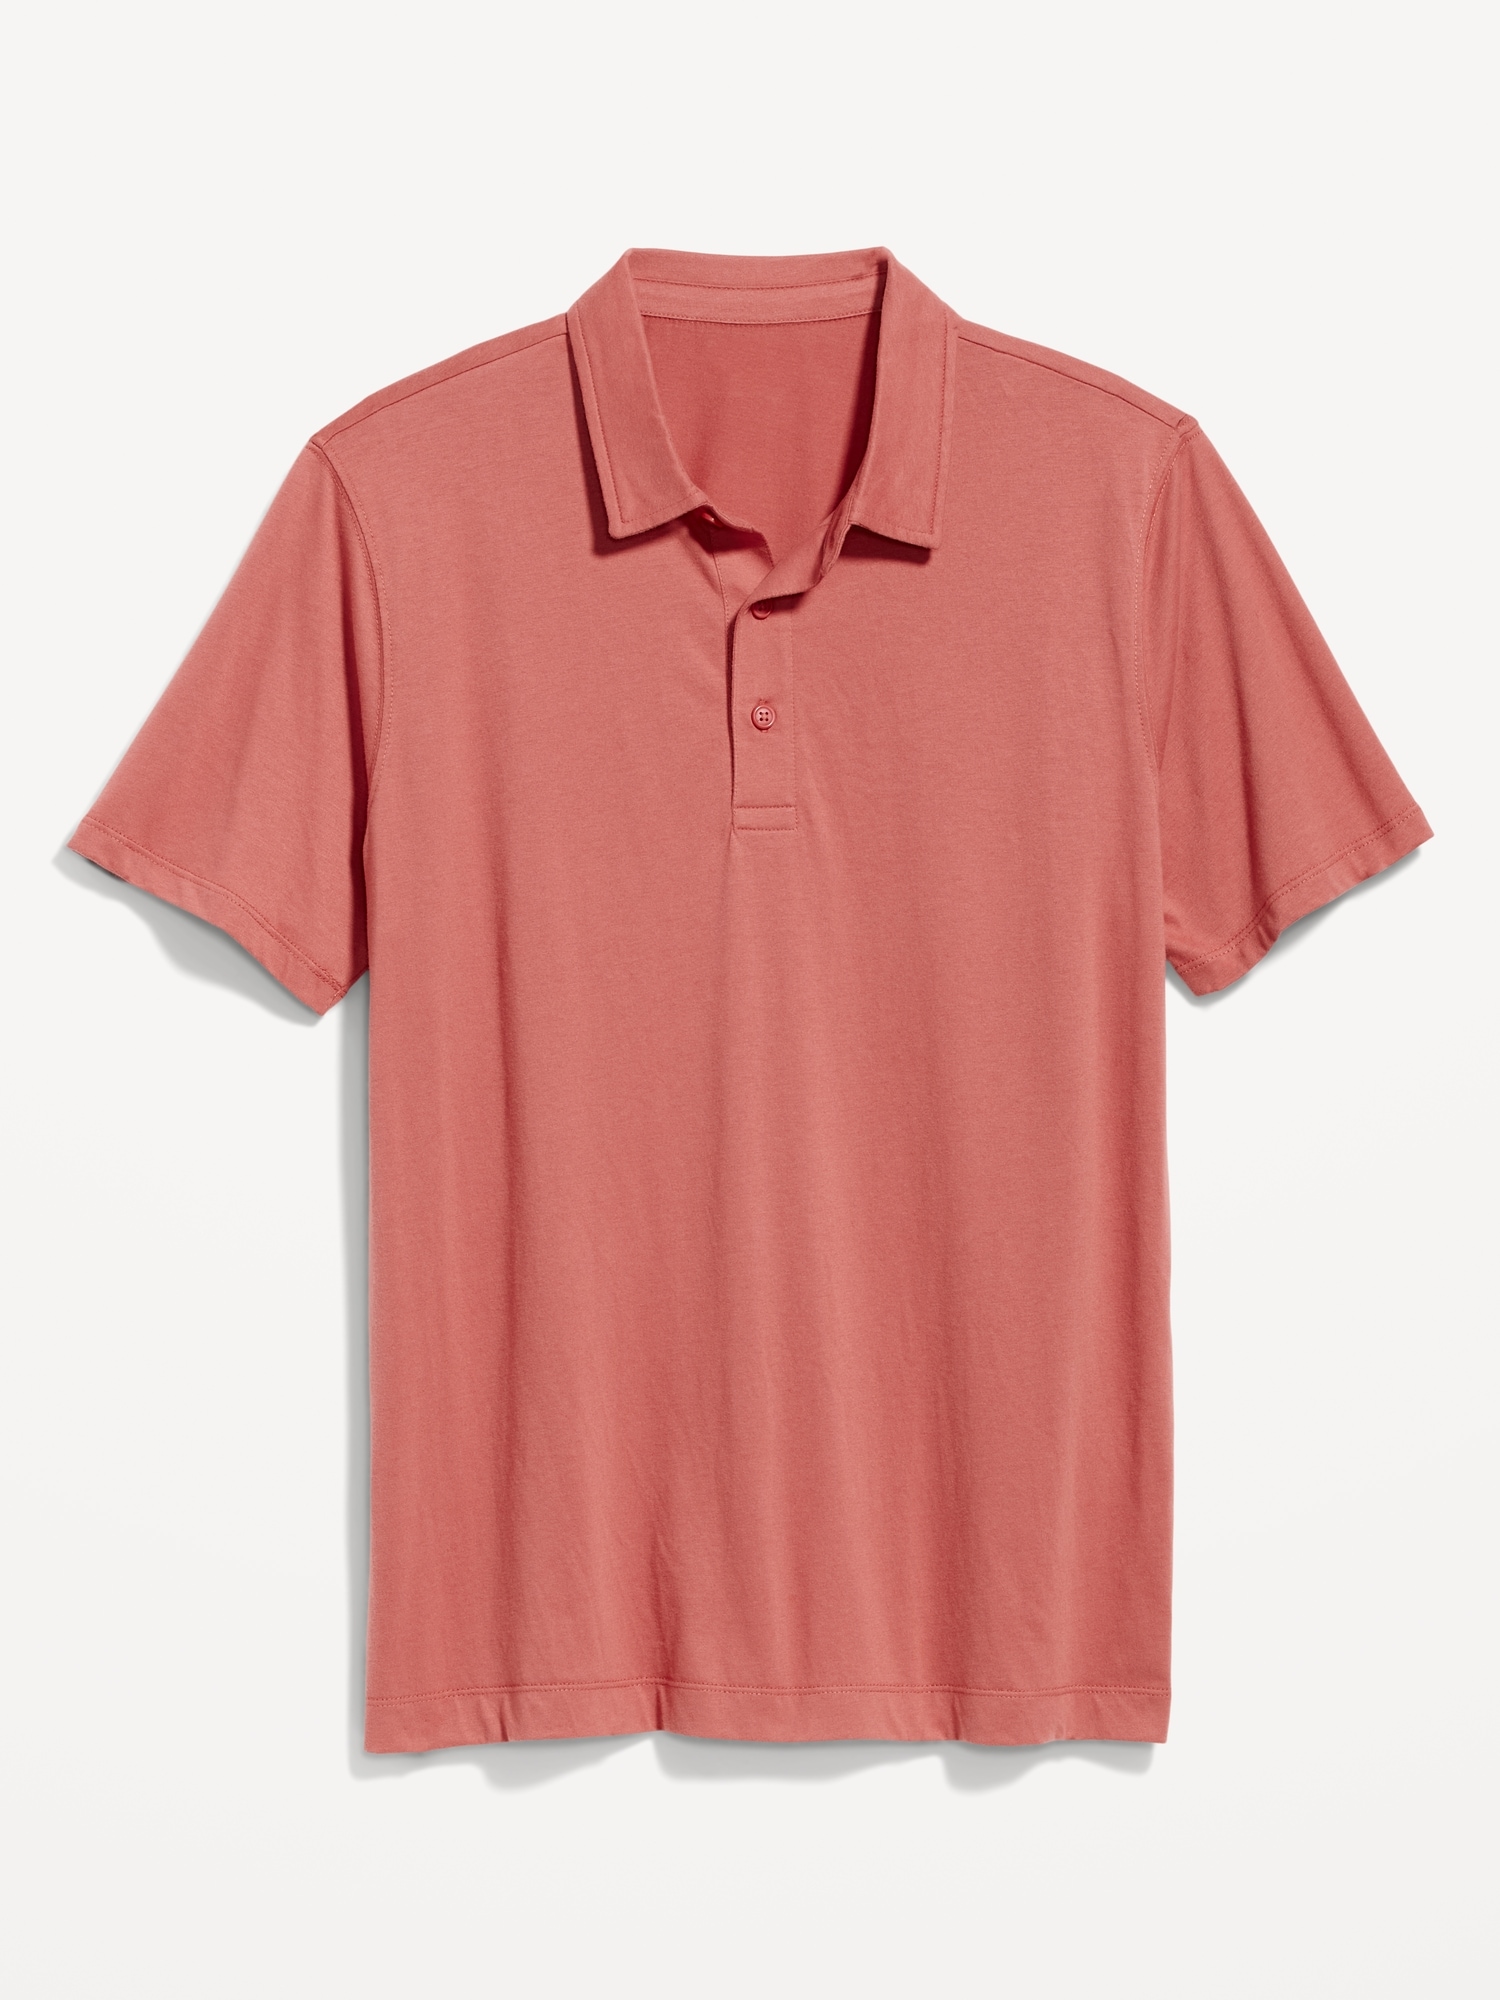 Old Navy Classic Fit Jersey Polo for Men red. 1